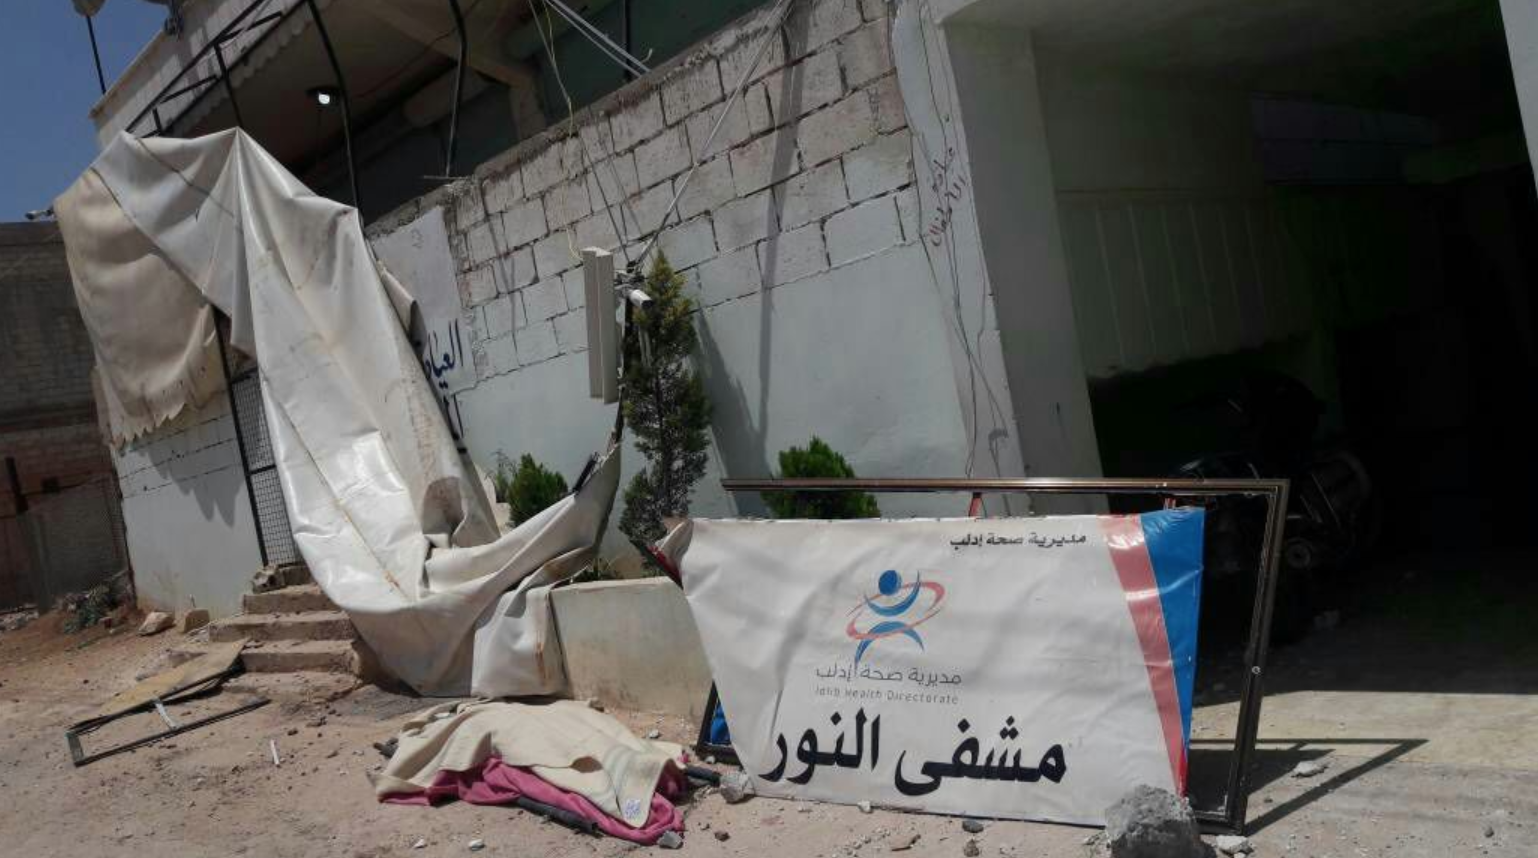 At least 10 people were killed, among them four children and one woman, in an airstrike that hit al Nour paediatrics hospital in Taftanaz on 9 June 2018